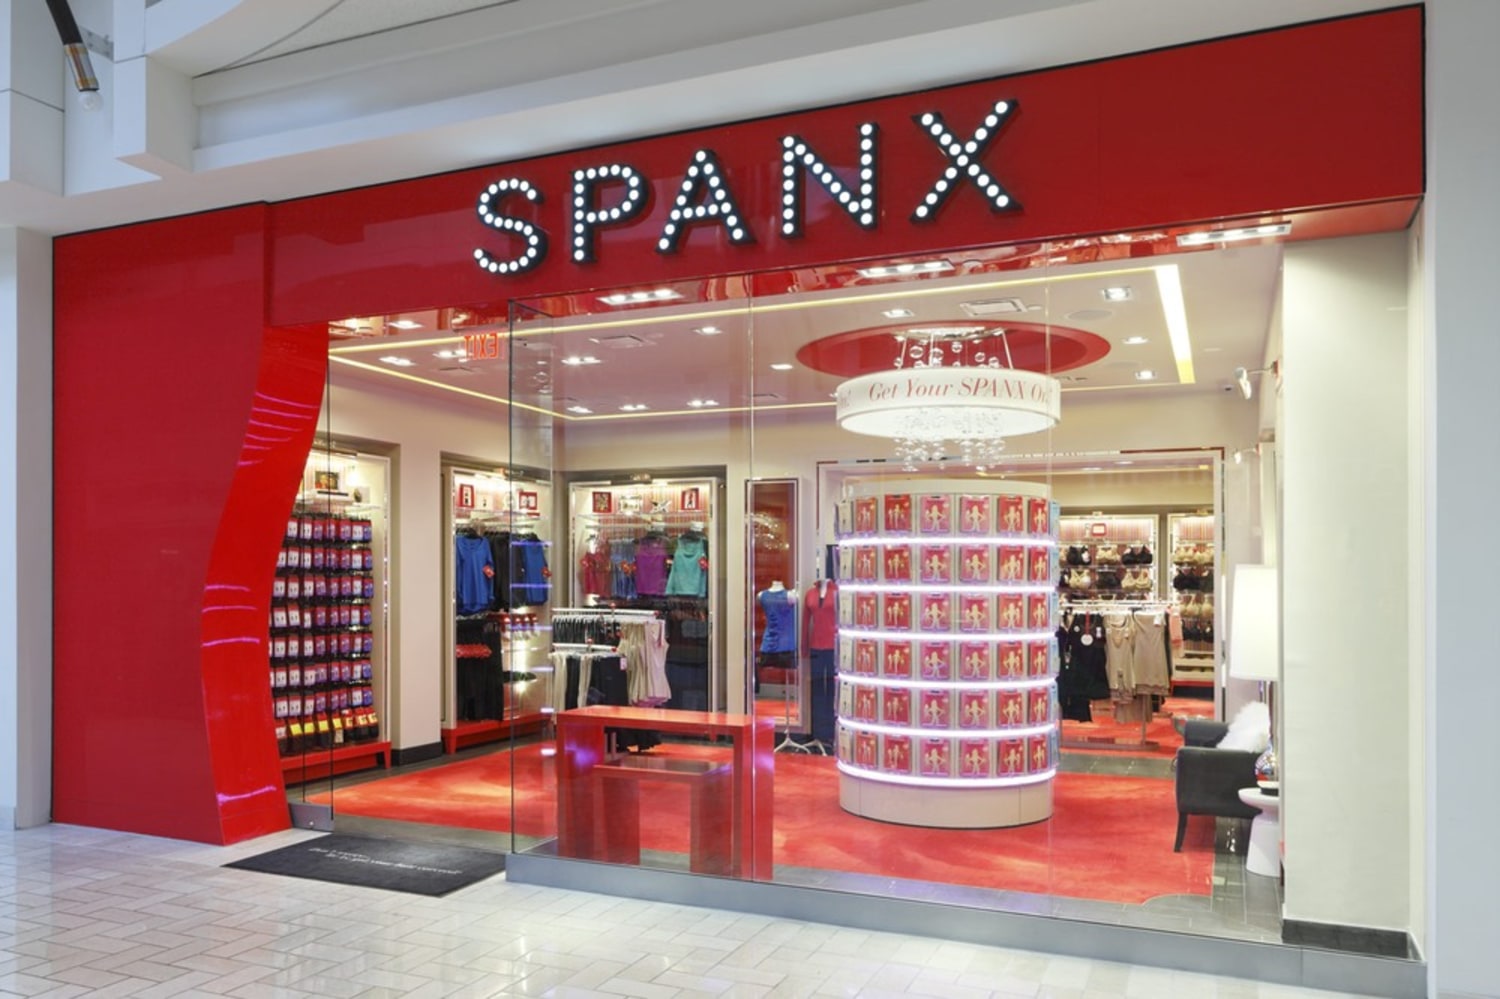 SPANX - 1 DAY!!! The first-ever standalone Spanx store opens